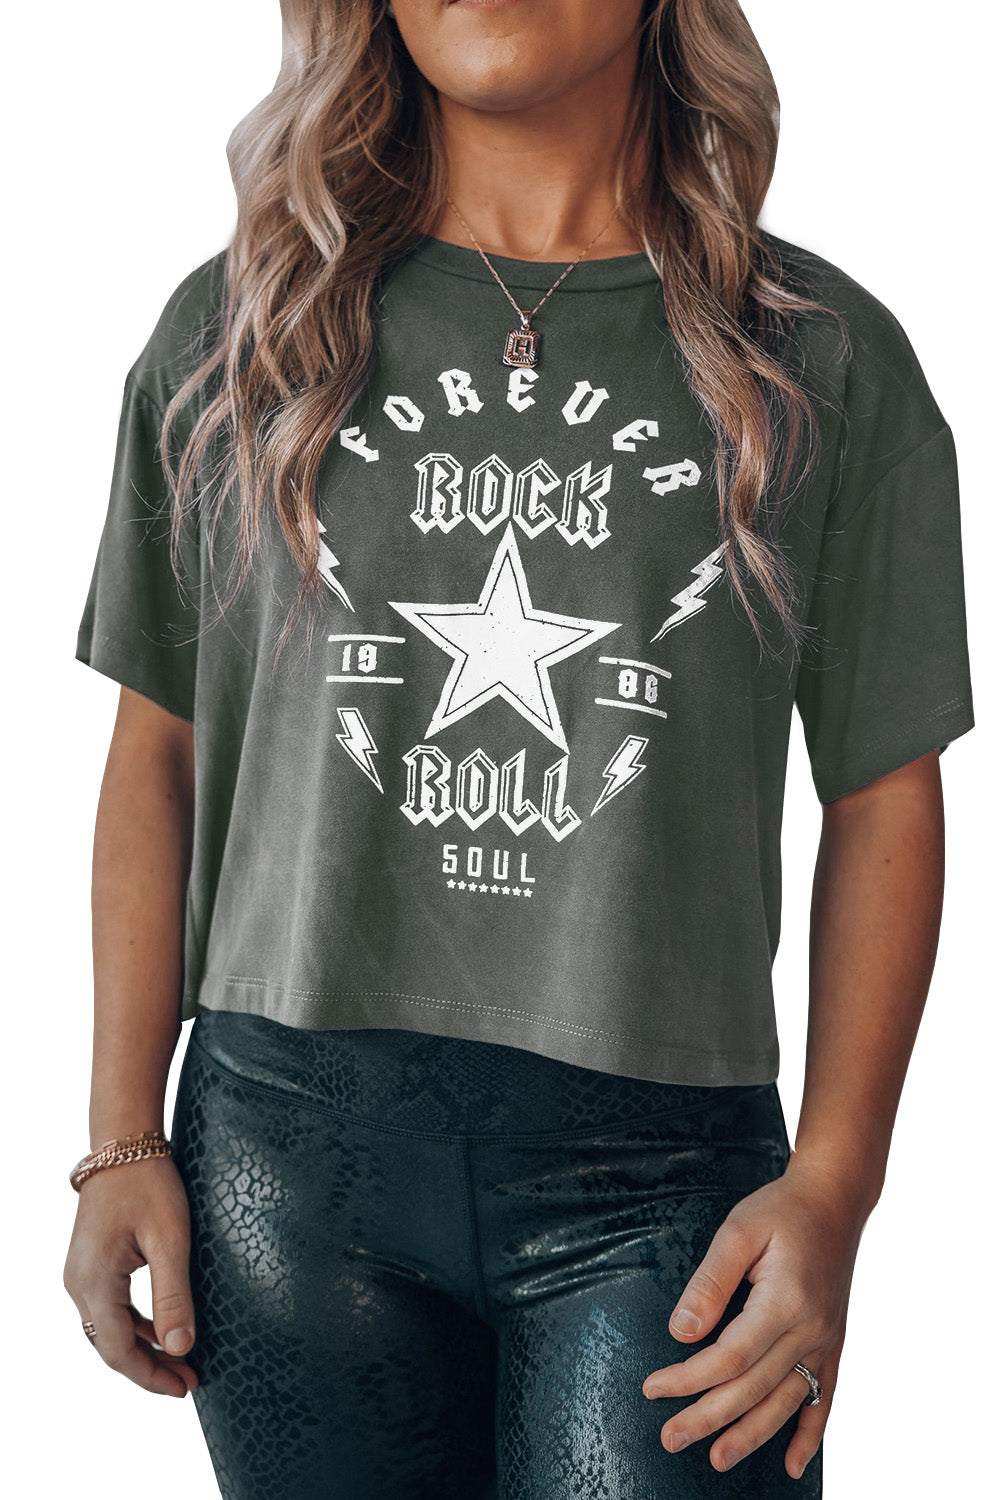 Forever Rock And Roll Graphic Crop Top